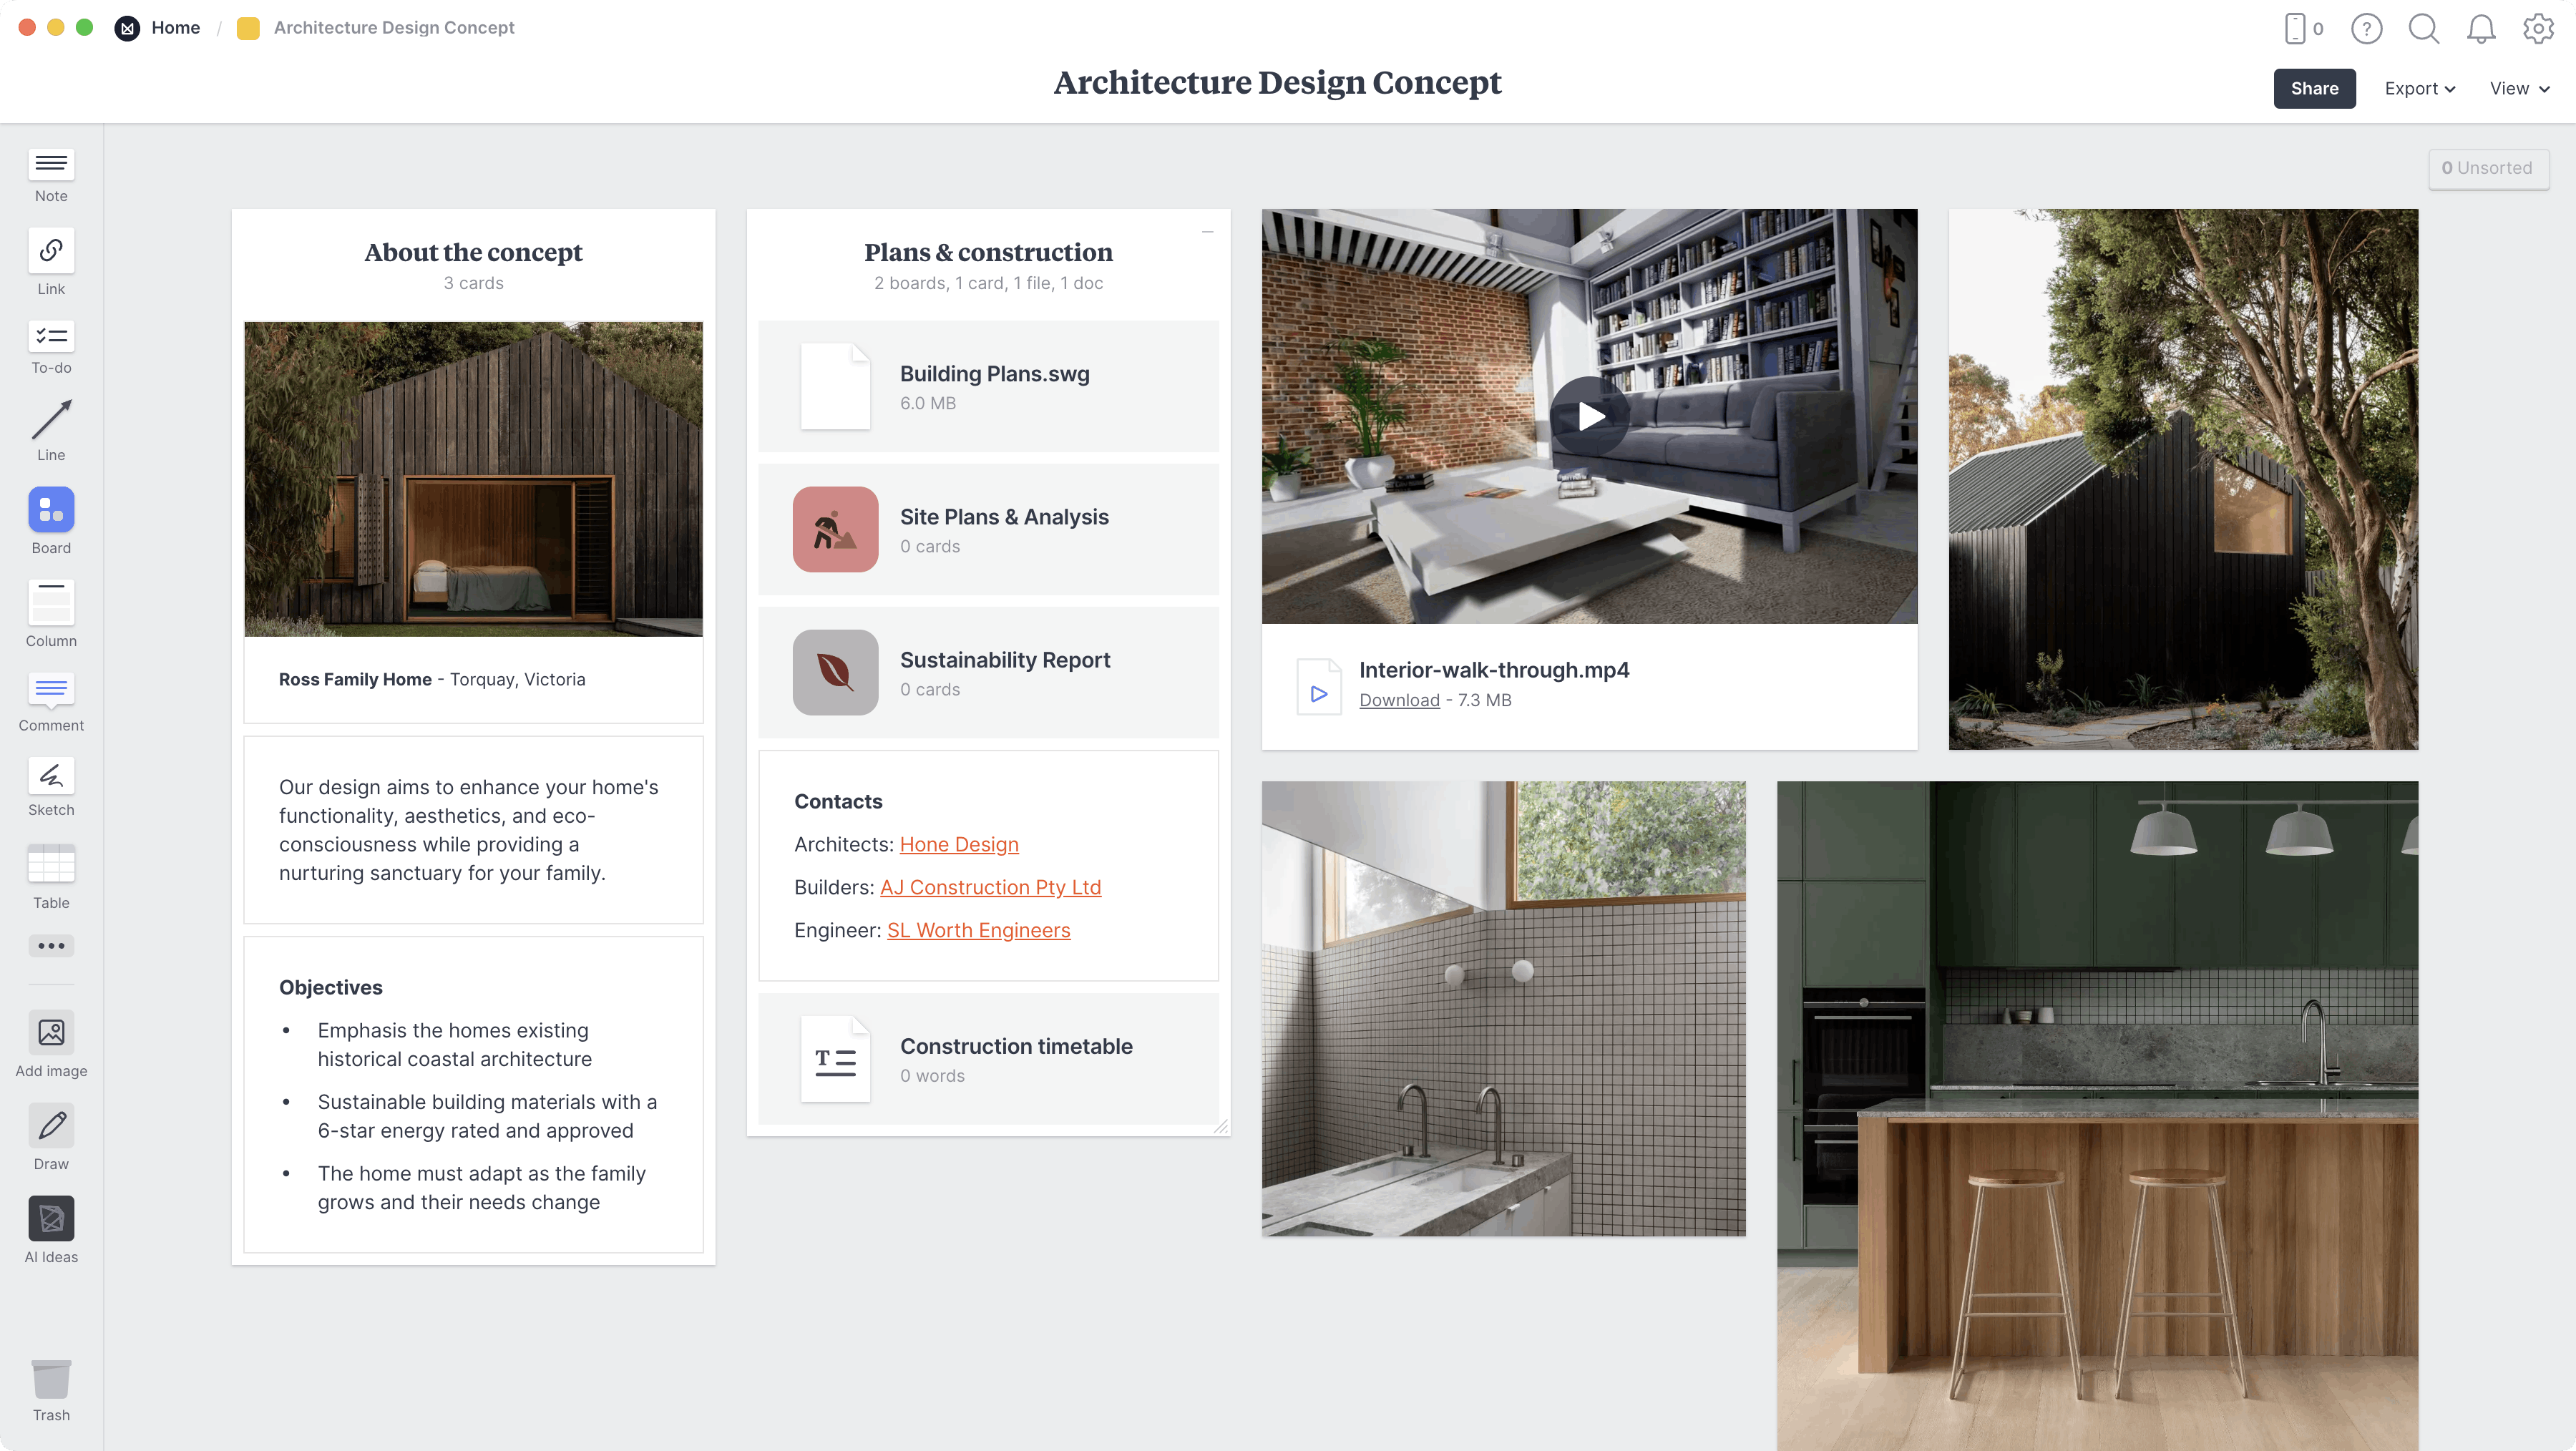 Architectural Design Concept  Template, within the Milanote app